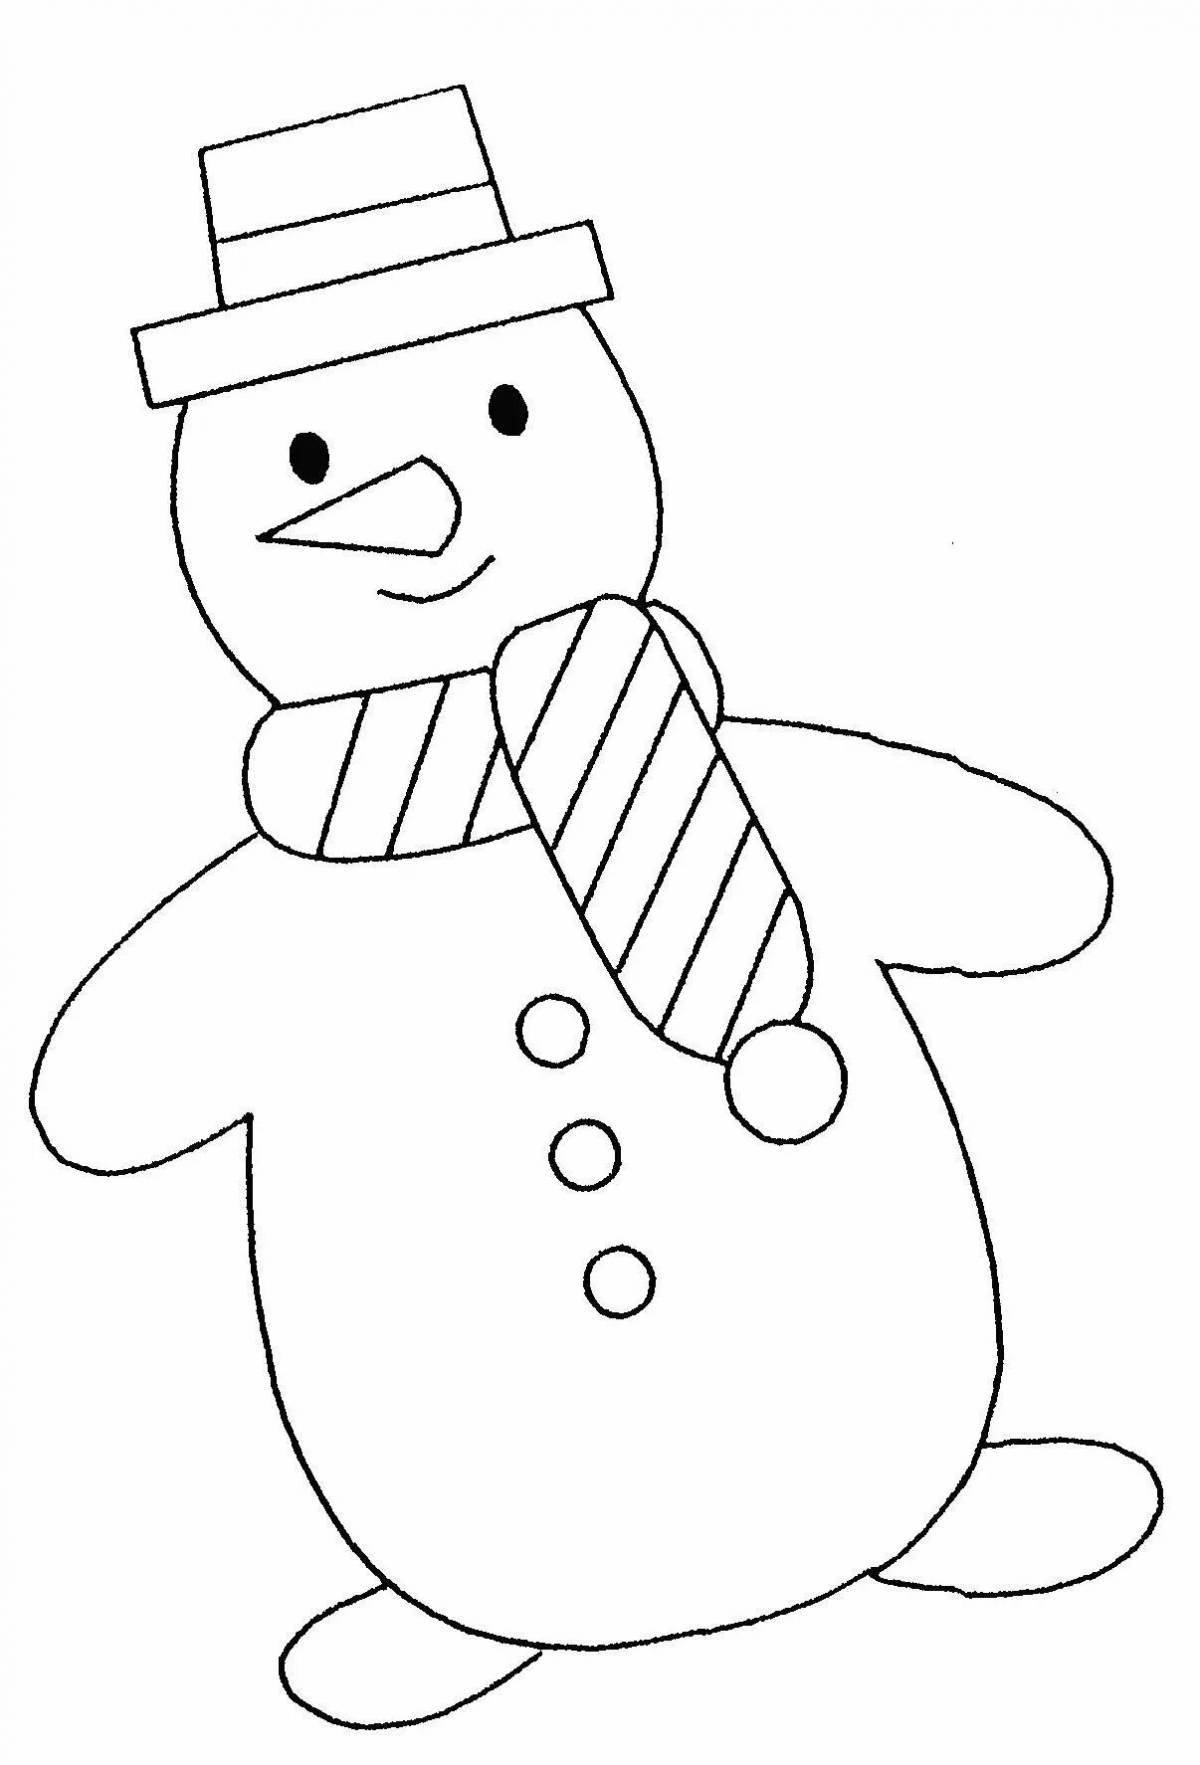 Gorgeous birthday snowman coloring page